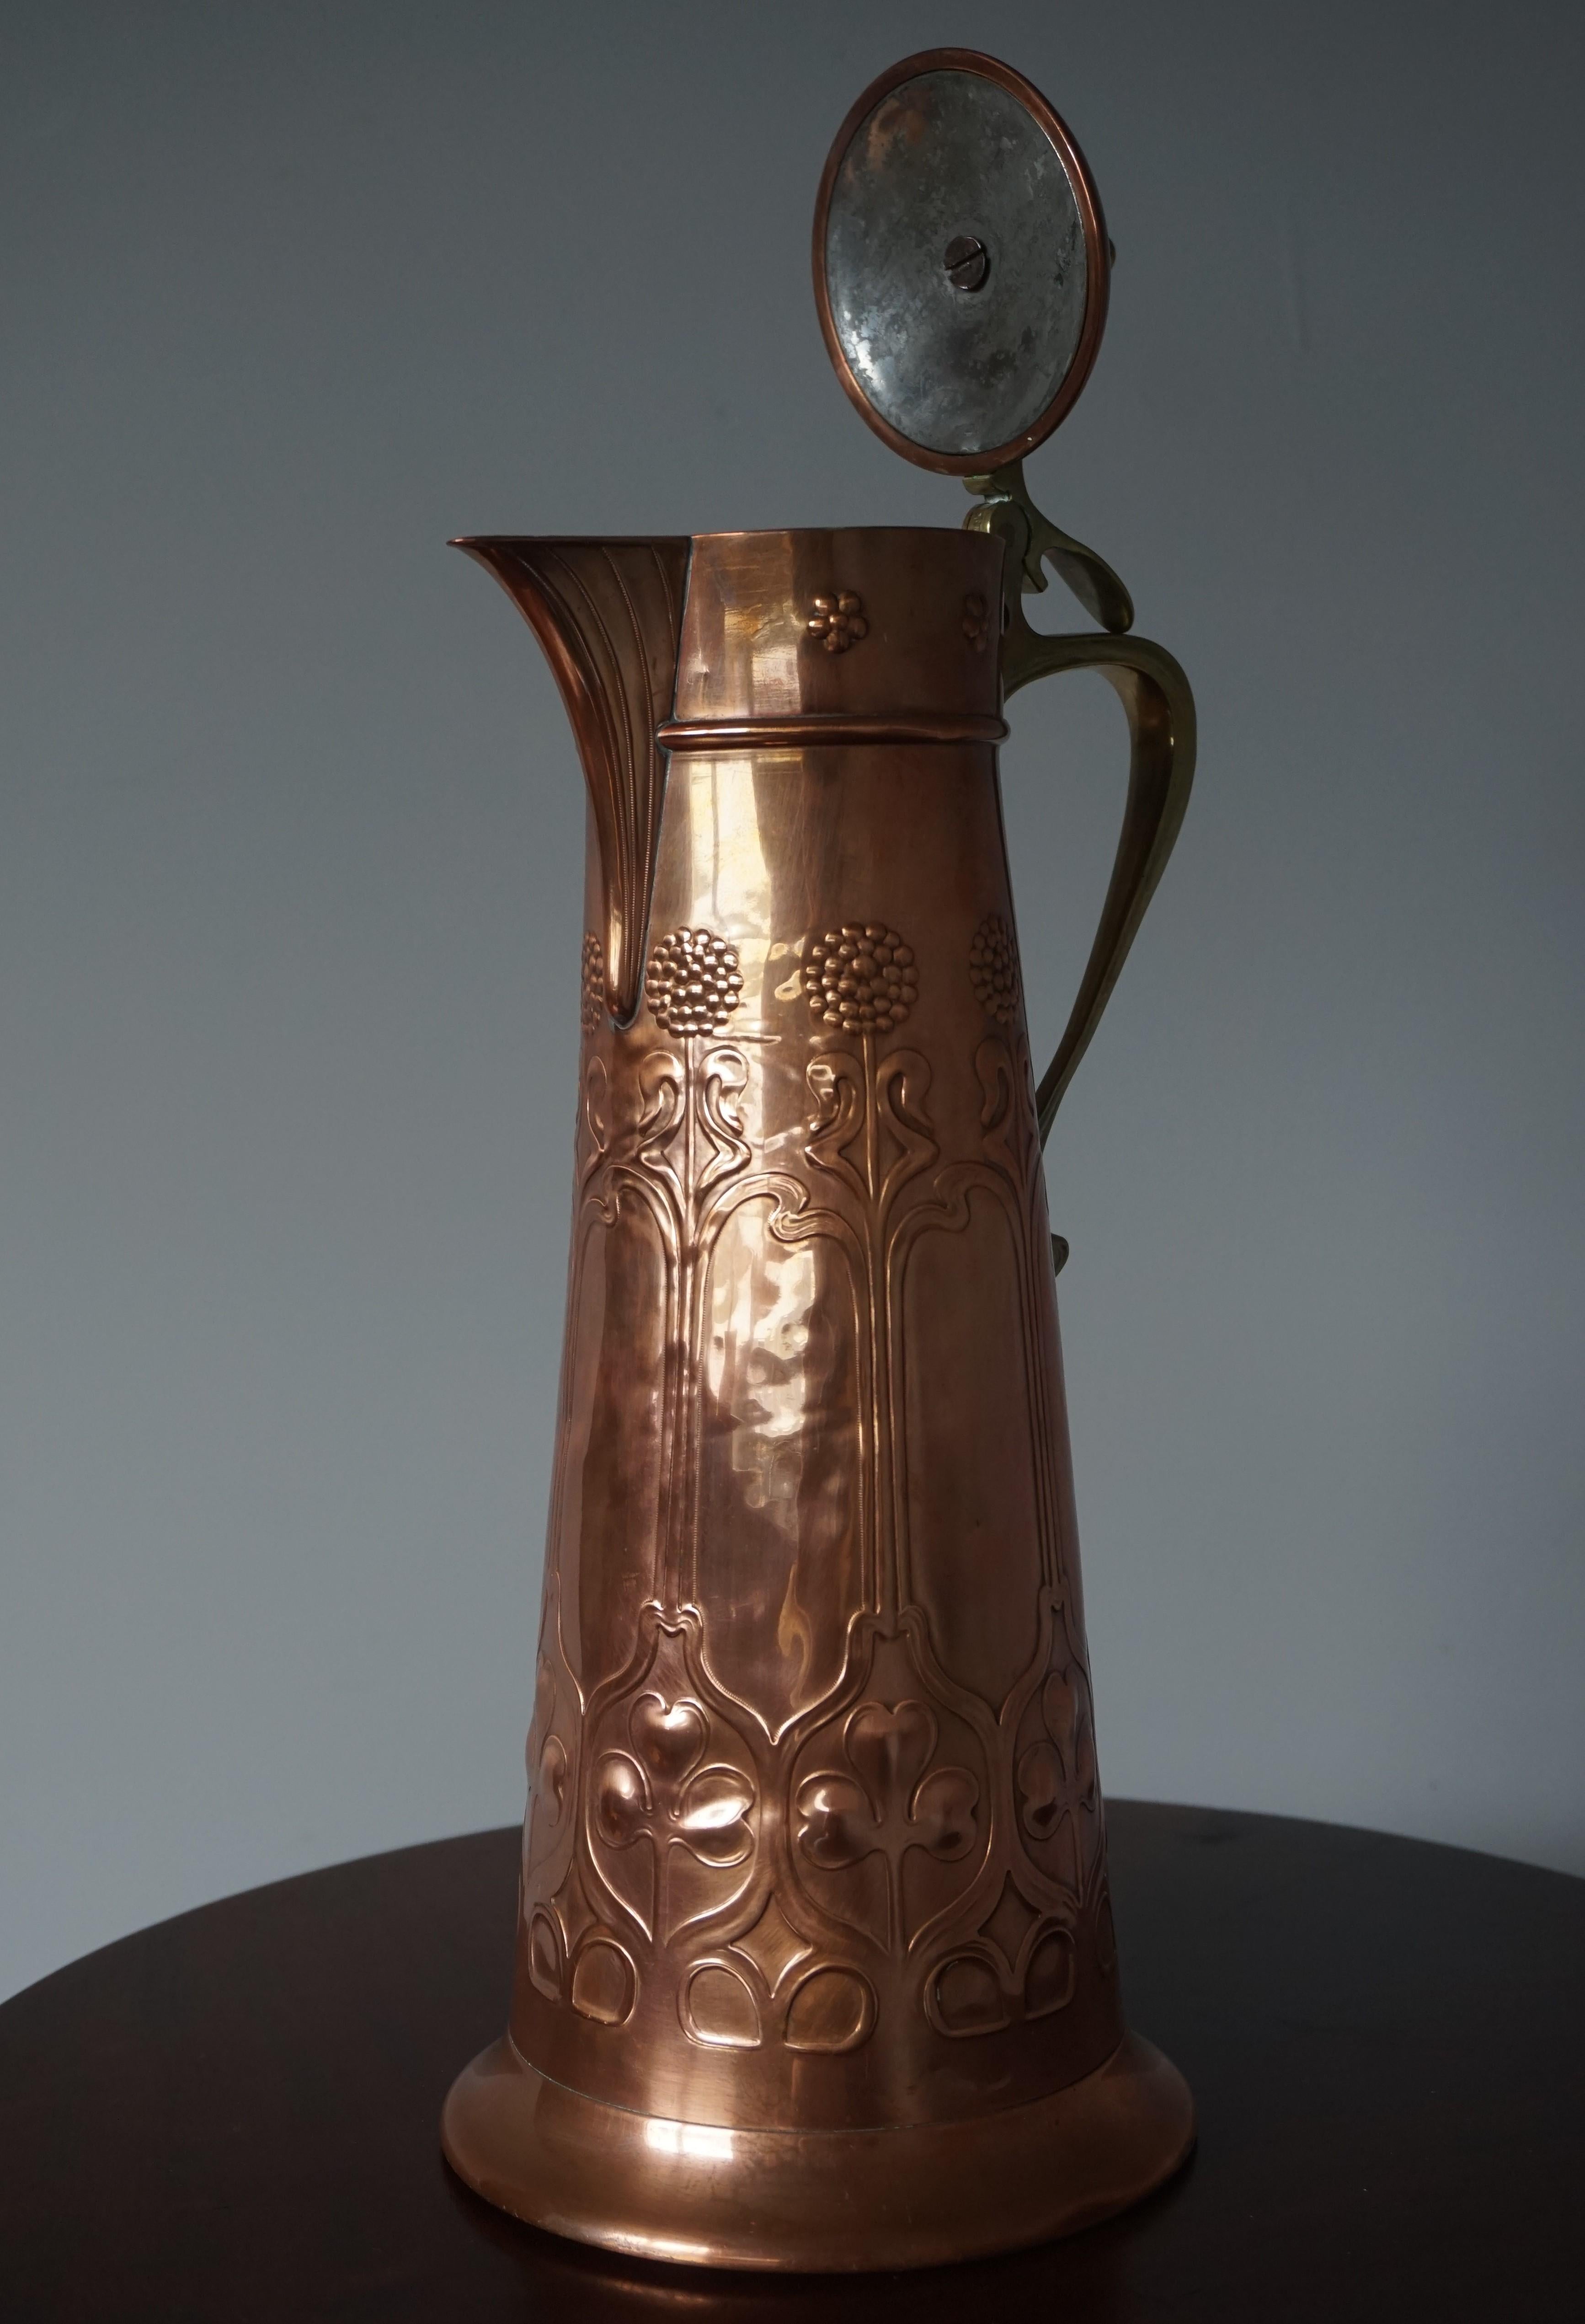 Stunning Arts & Crafts WMF Red Copper & Brass Jug or Vase with Stylized Flowers For Sale 4